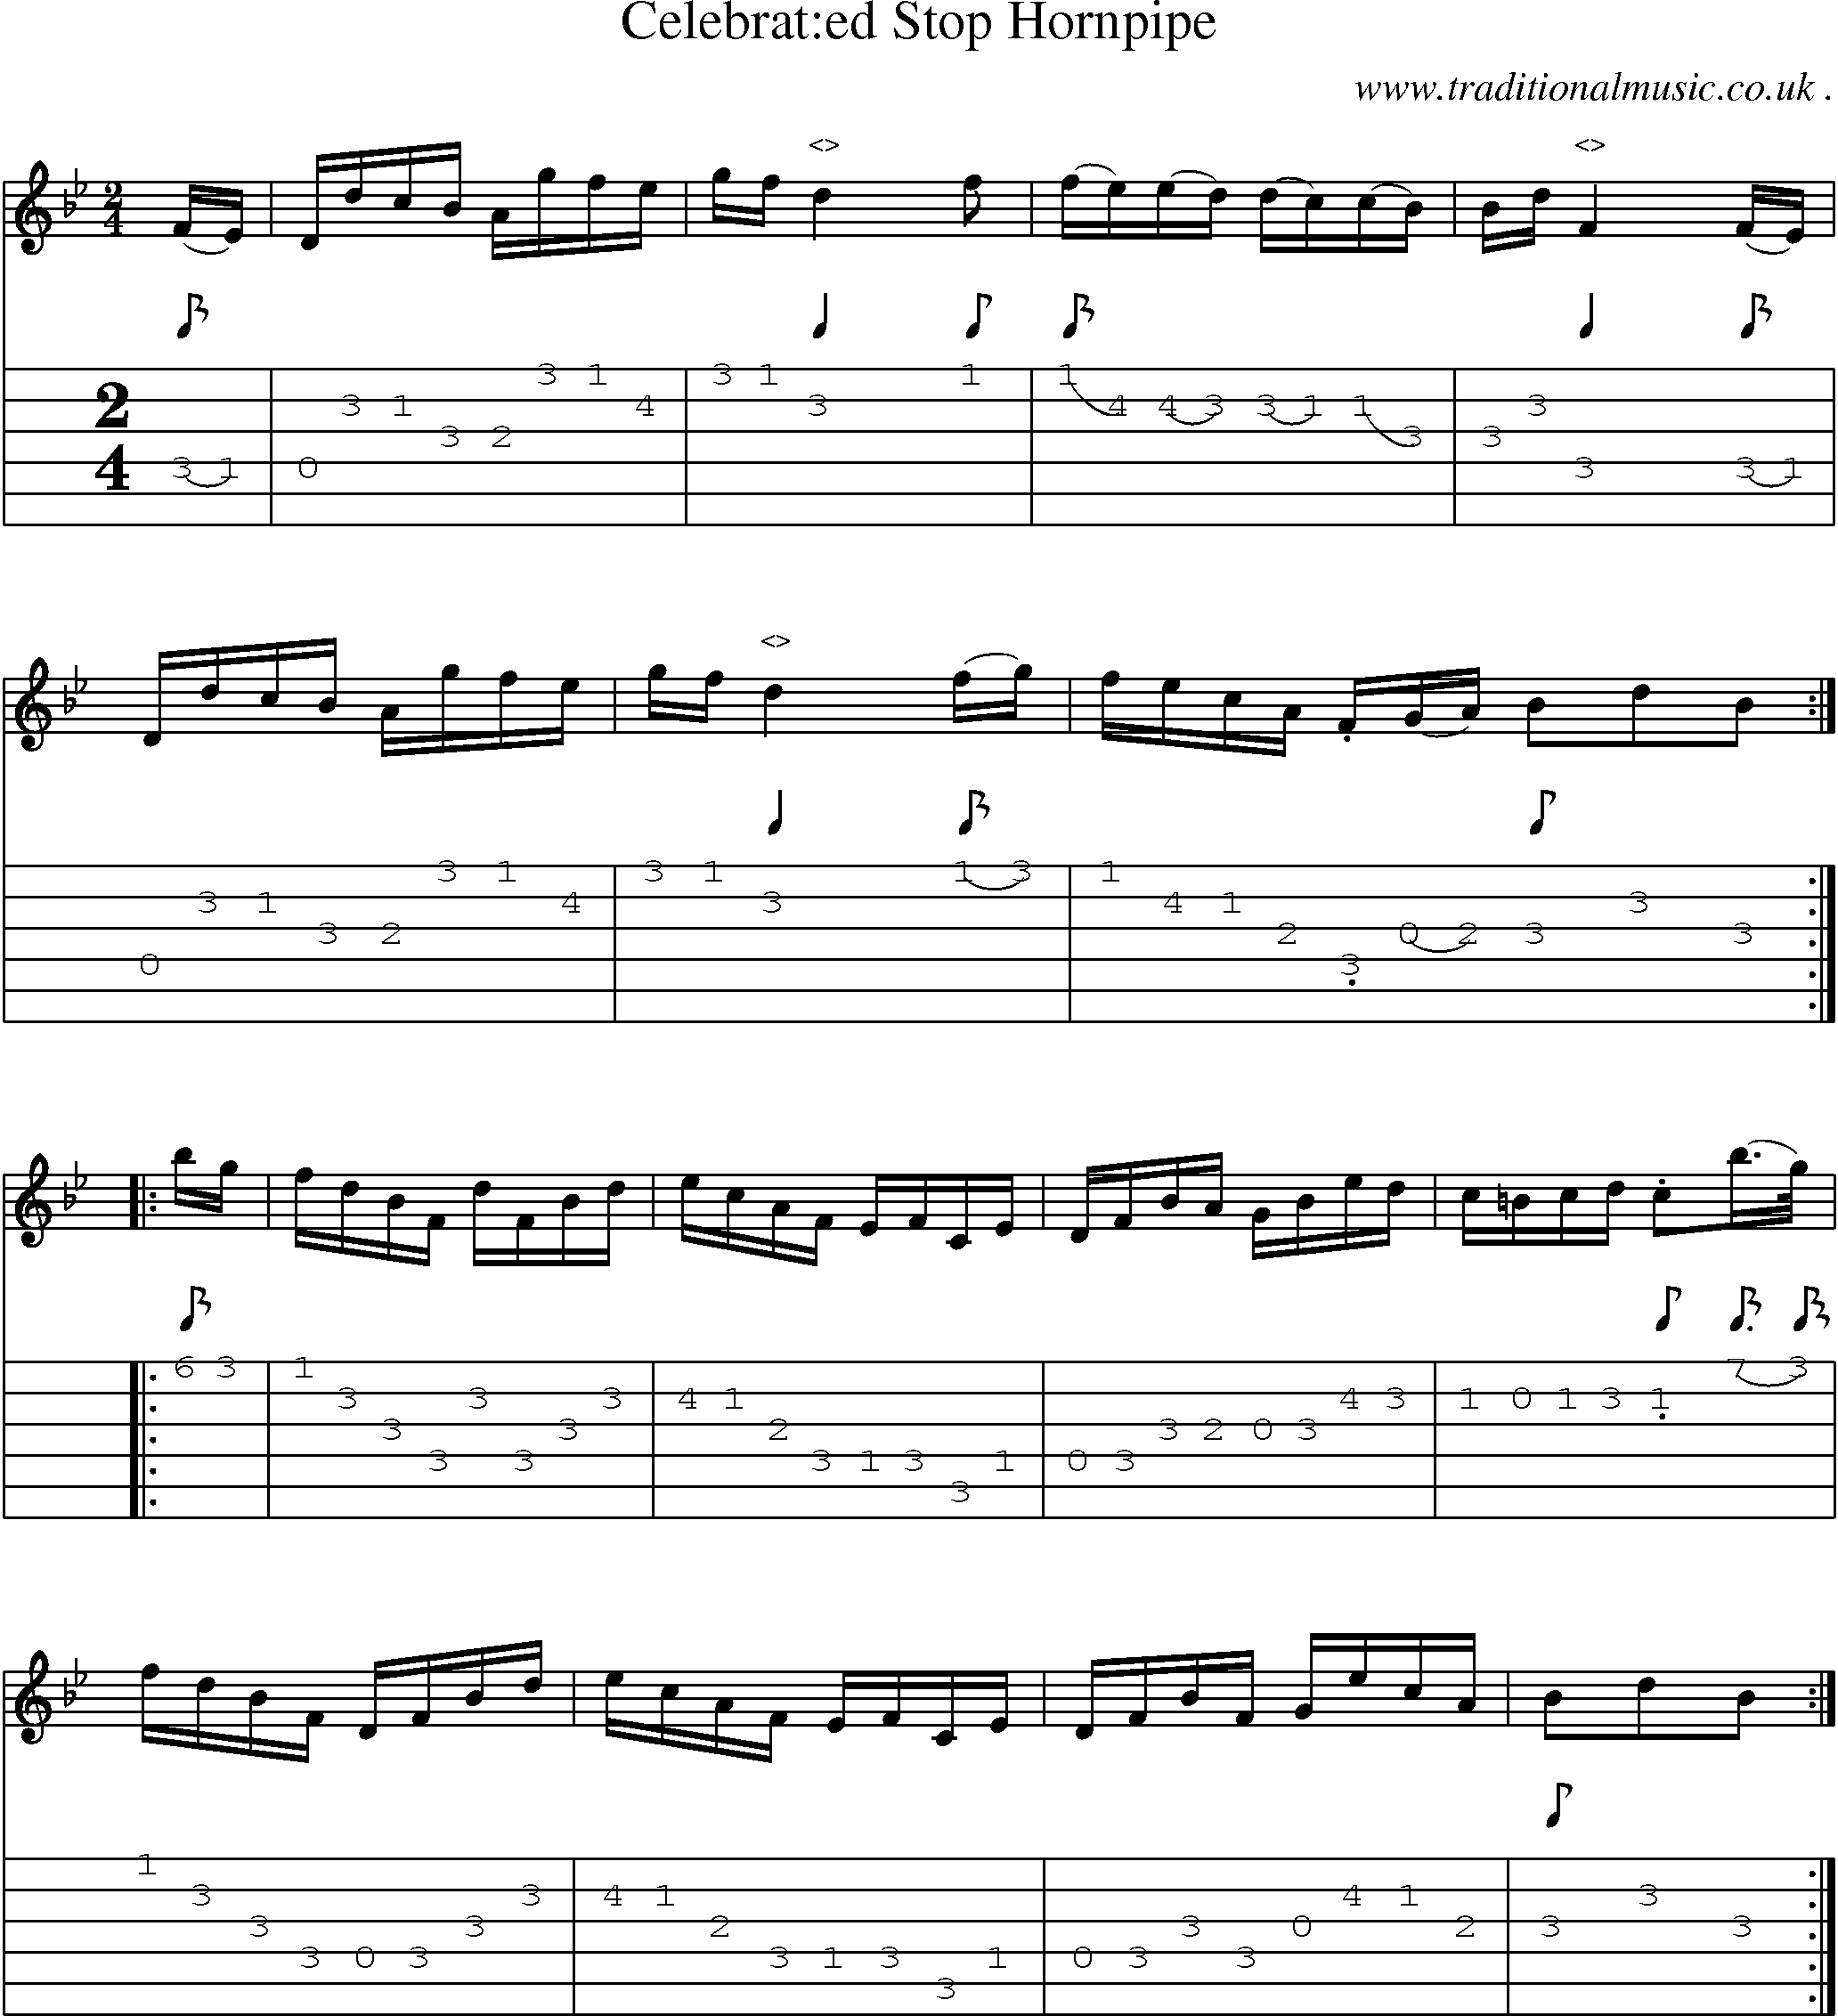 Sheet-Music and Guitar Tabs for Celebrated Stop Hornpipe